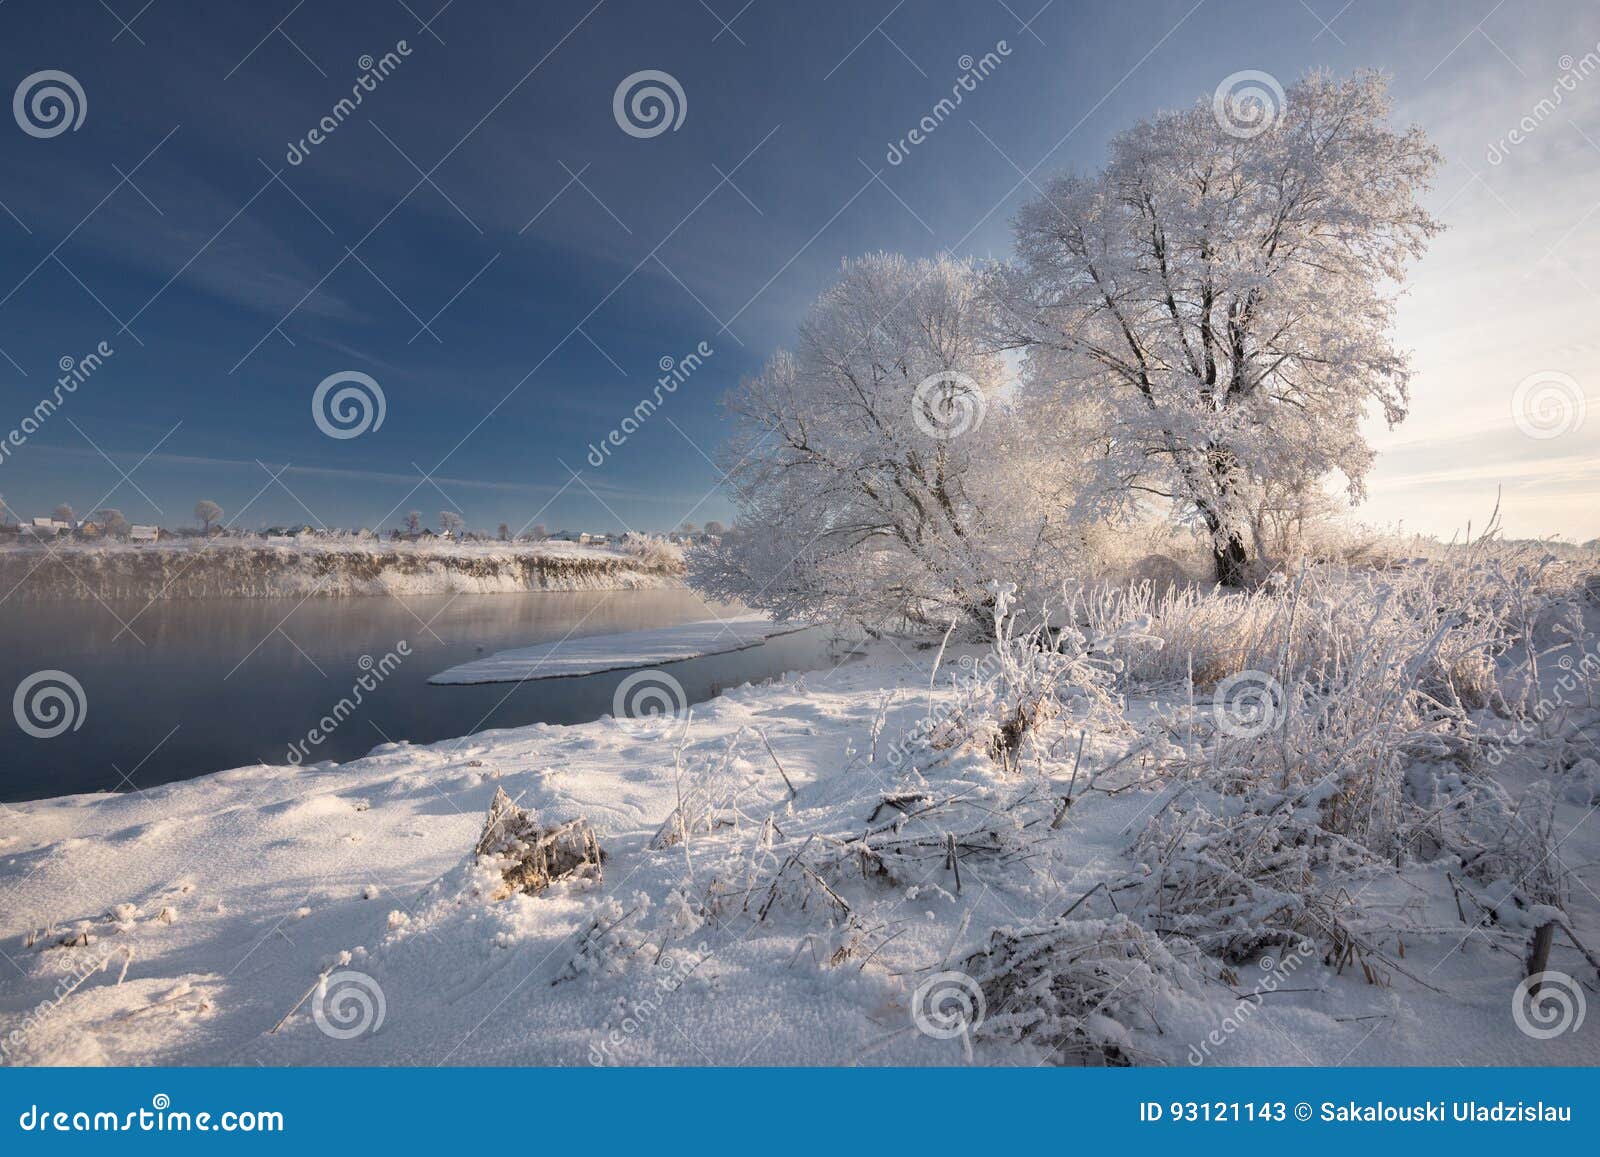 morning frosty winter landscape with dazzling white snow and hoarfrost, river and a saturated blue sky.winter small river on a sun